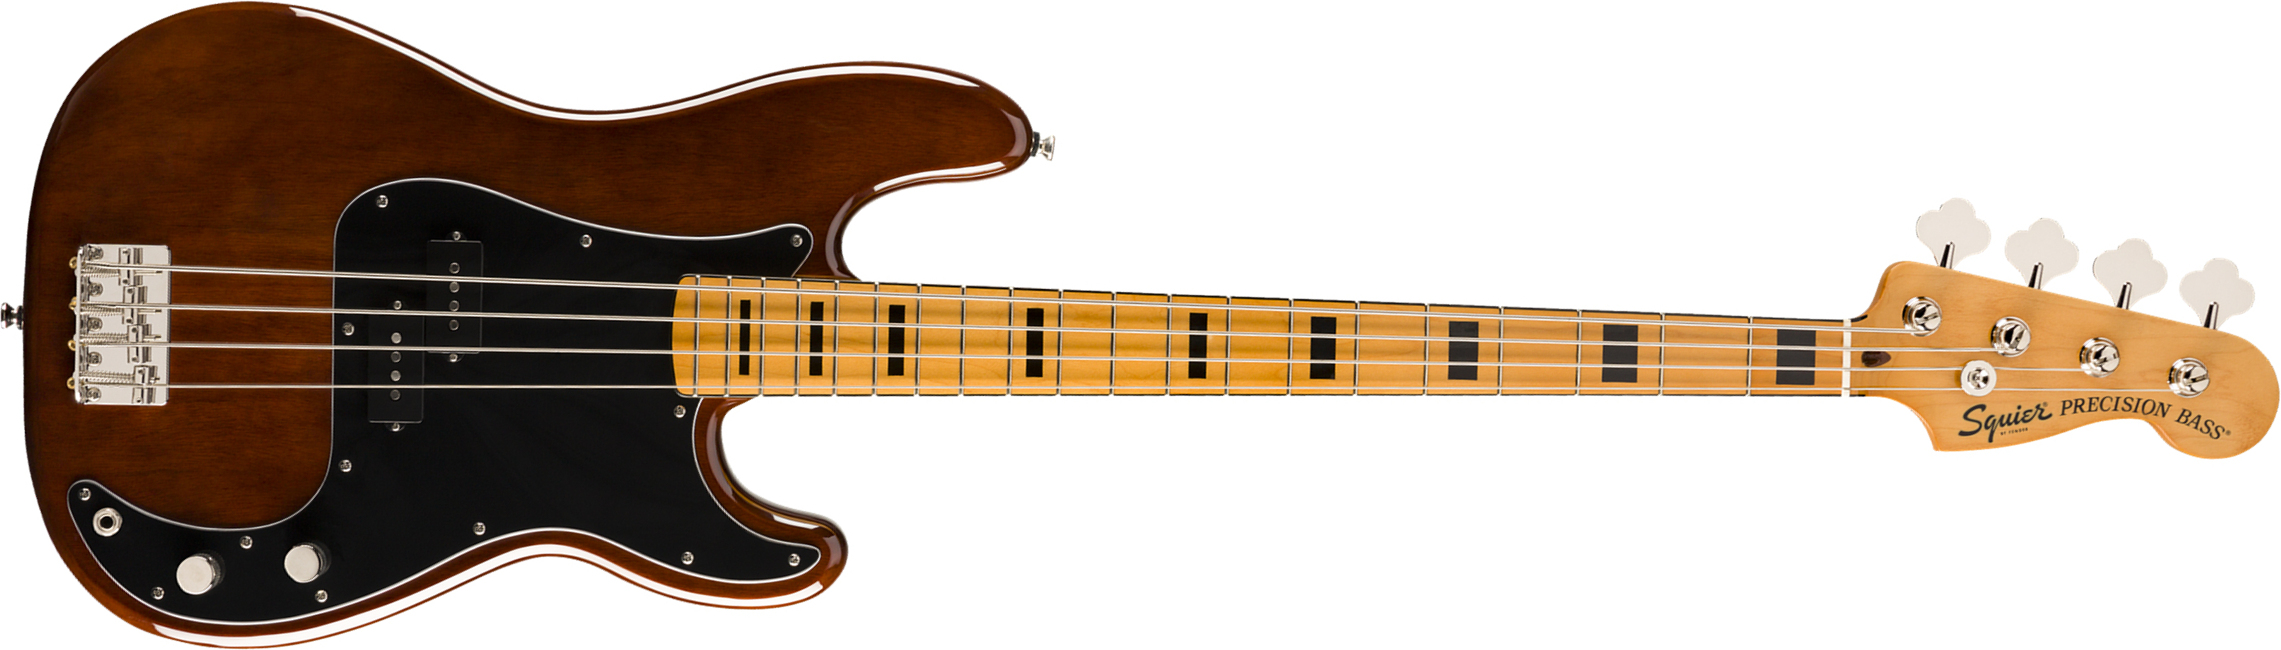 Squier Precision Bass '70s Classic Vibe 2019 Mn - Walnut - Solid body electric bass - Main picture